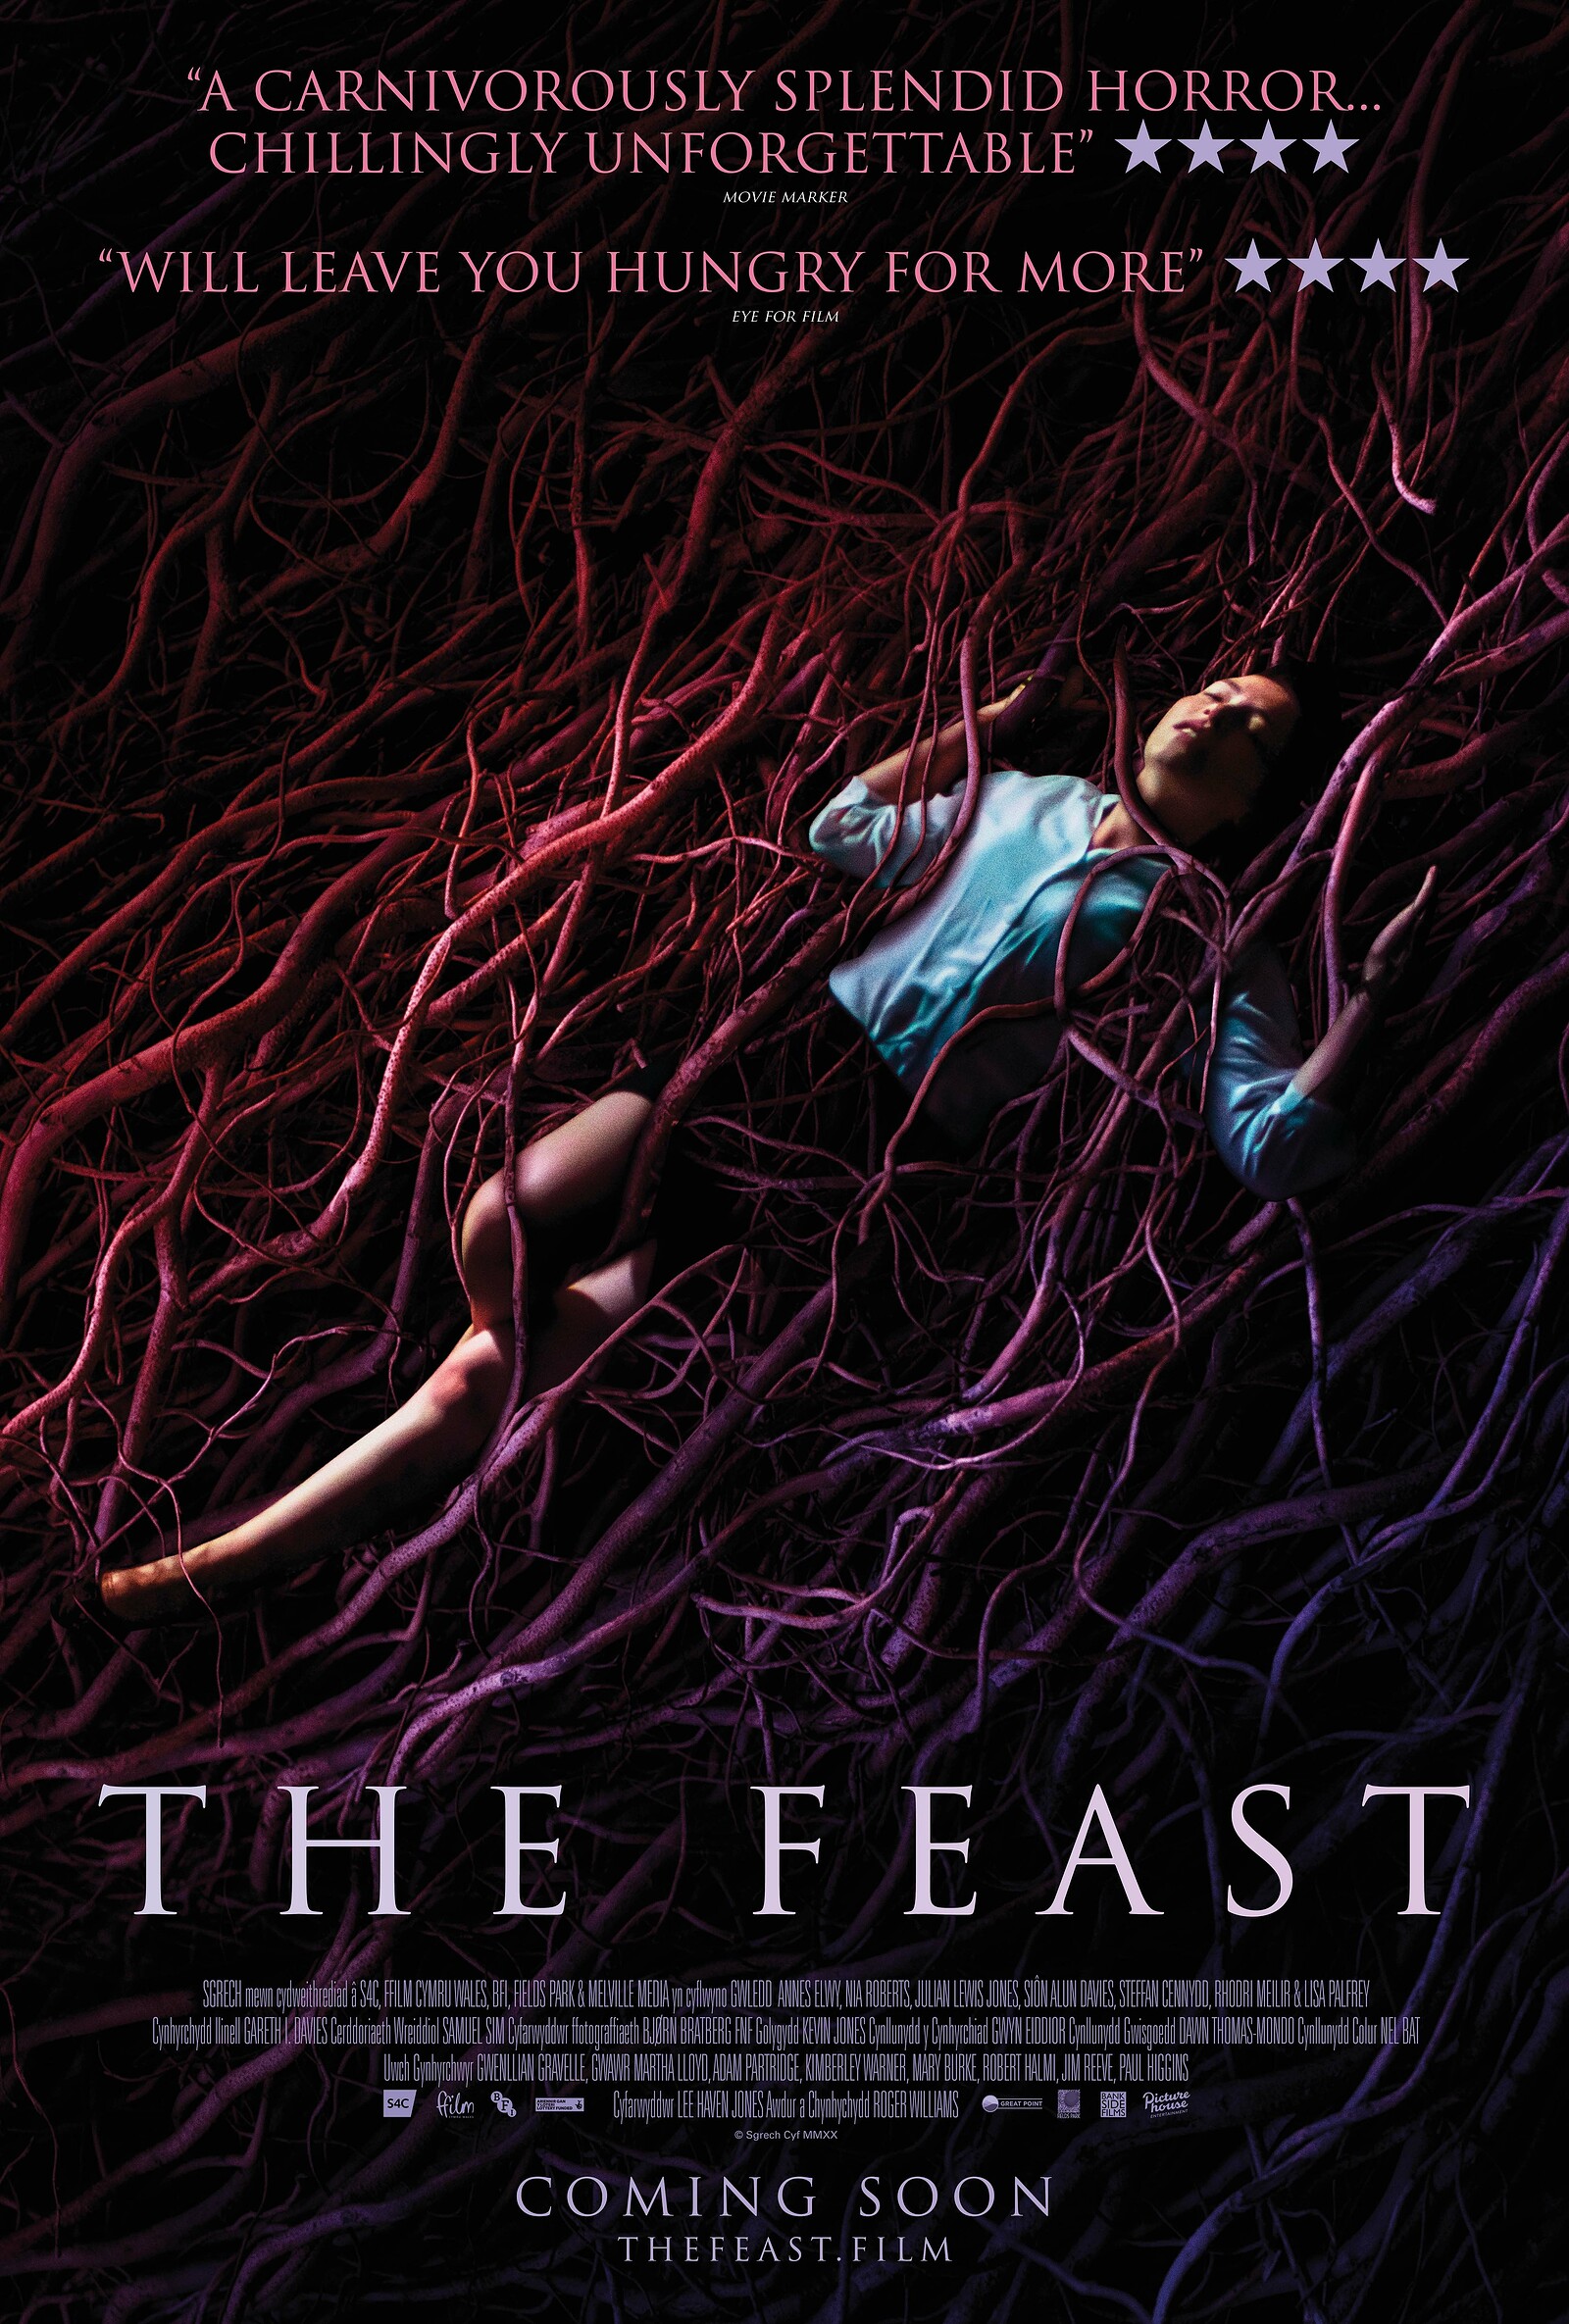 The Feast Film screening + Filmmaker Q&A at Watershed